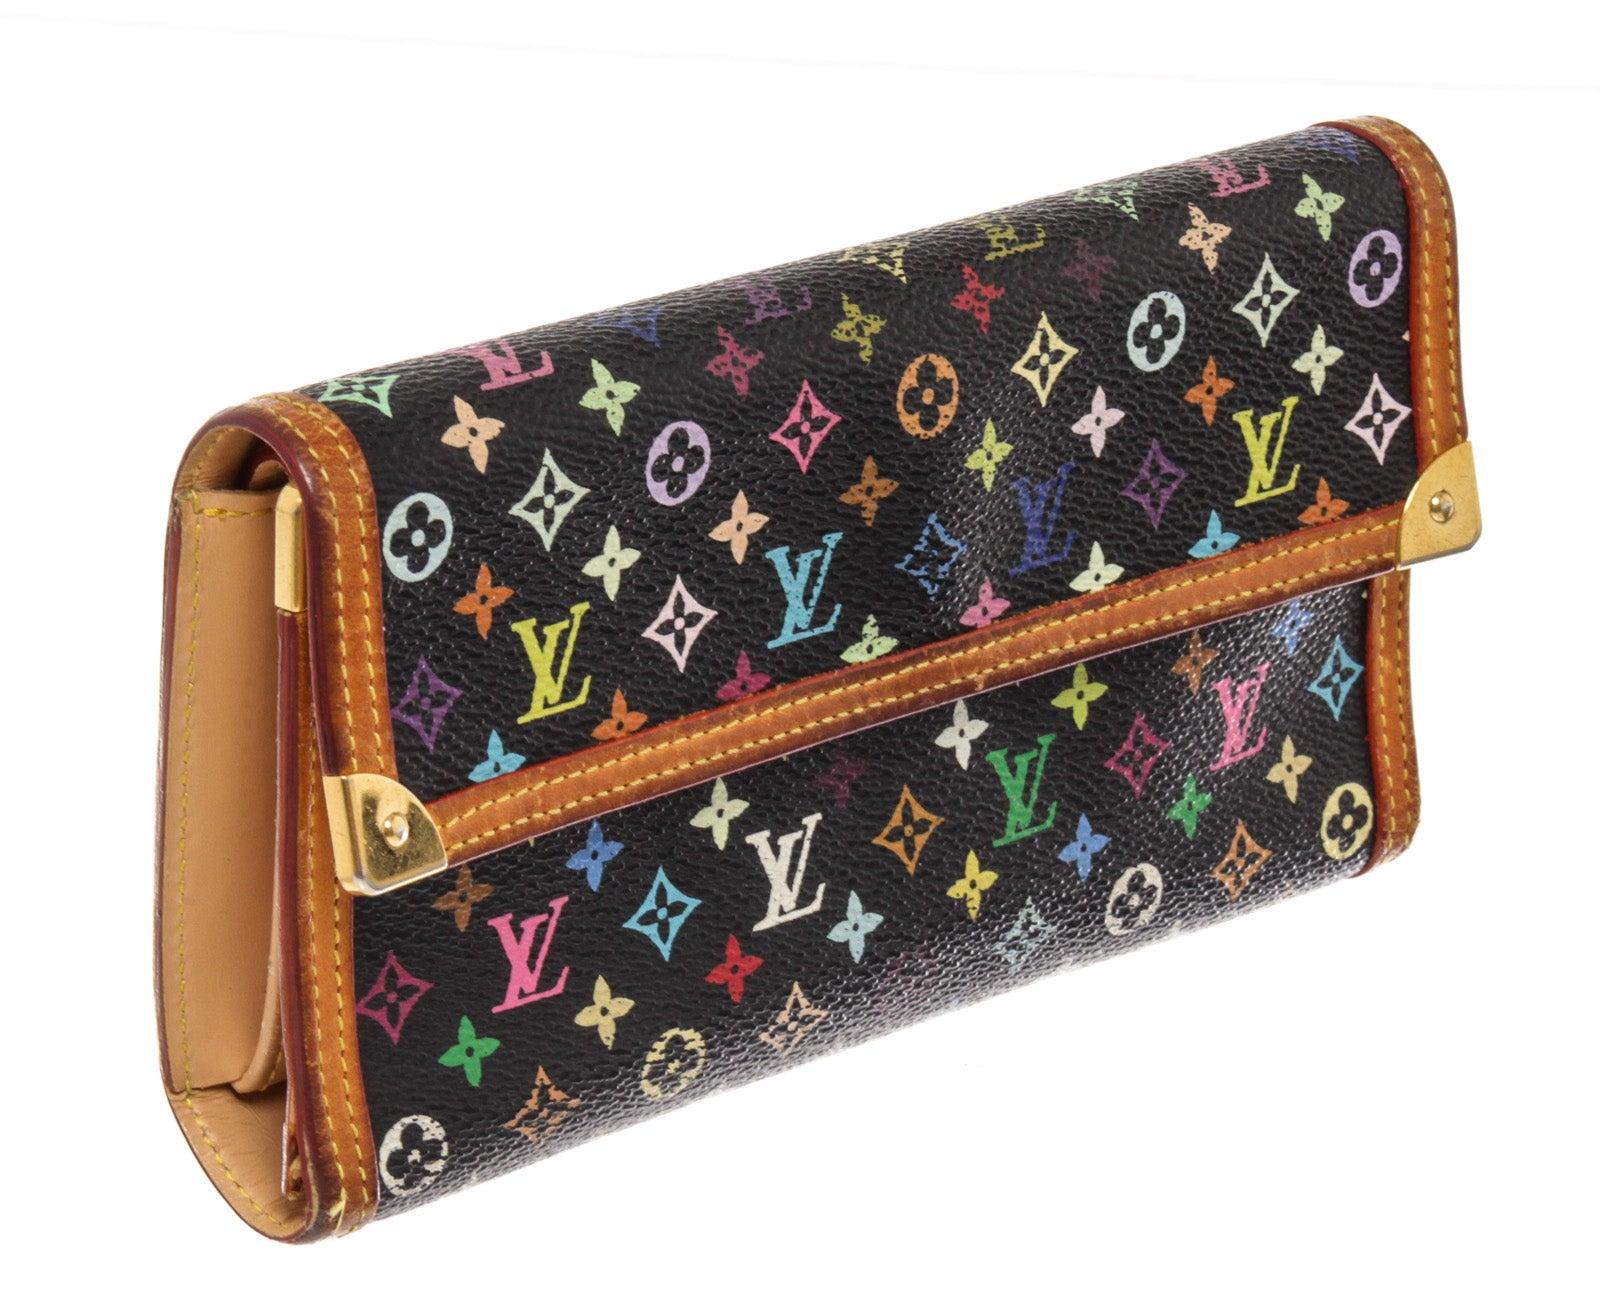 Black multicolor Monogram coated canvas Louis Vuitton International wallet with gold-tone hardware, beige leather lining, four card slots and dual bill compartments at interior walls, coin pouch with snap closure and snap closure at front flap.

